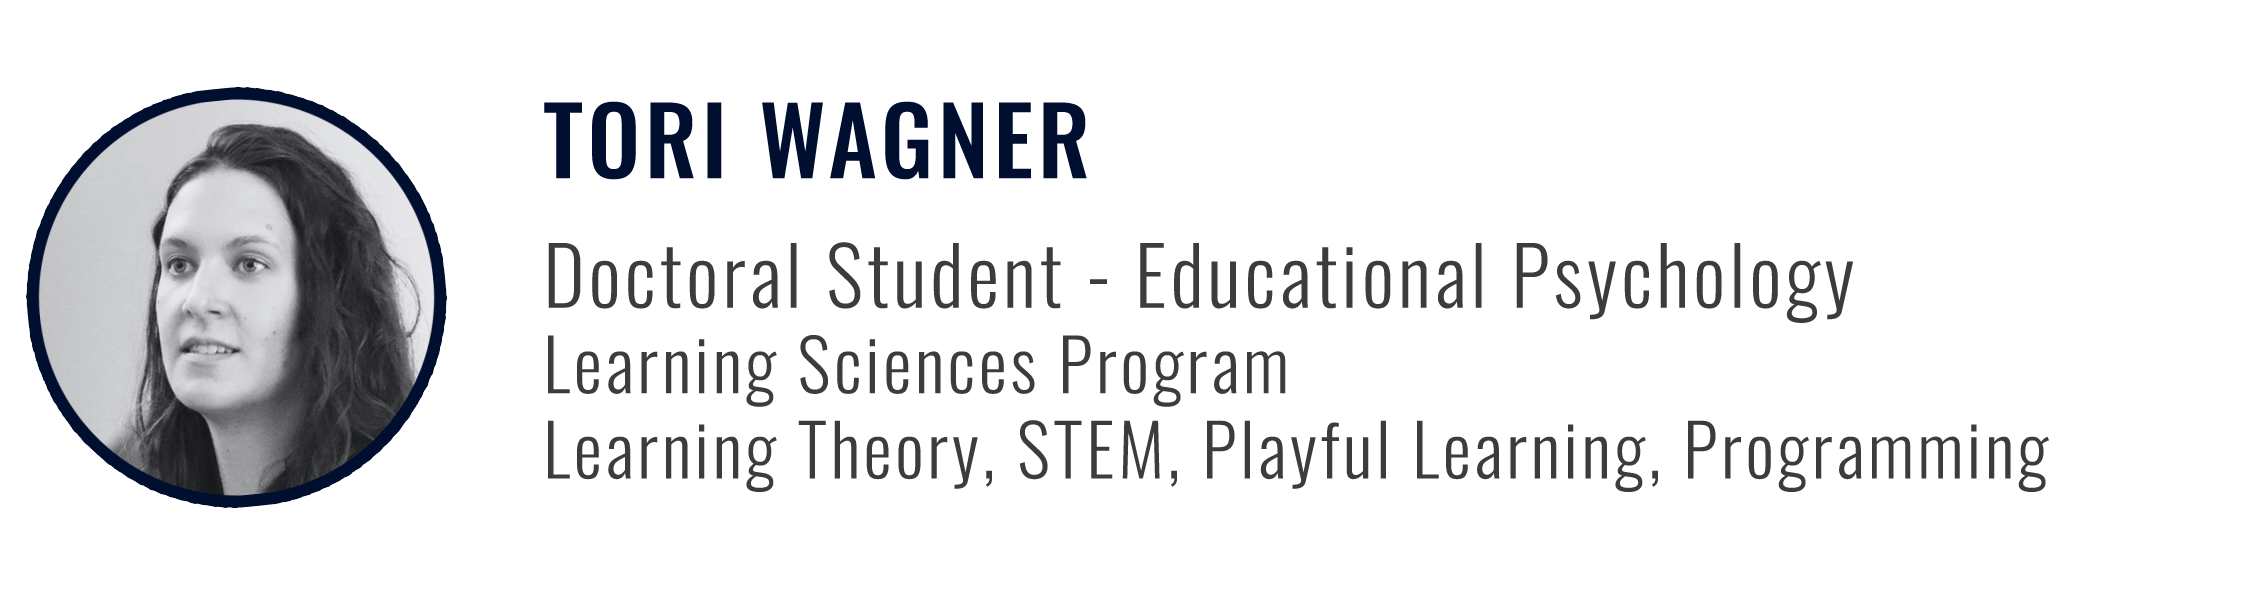 Tori Wagner - Doctoral Student